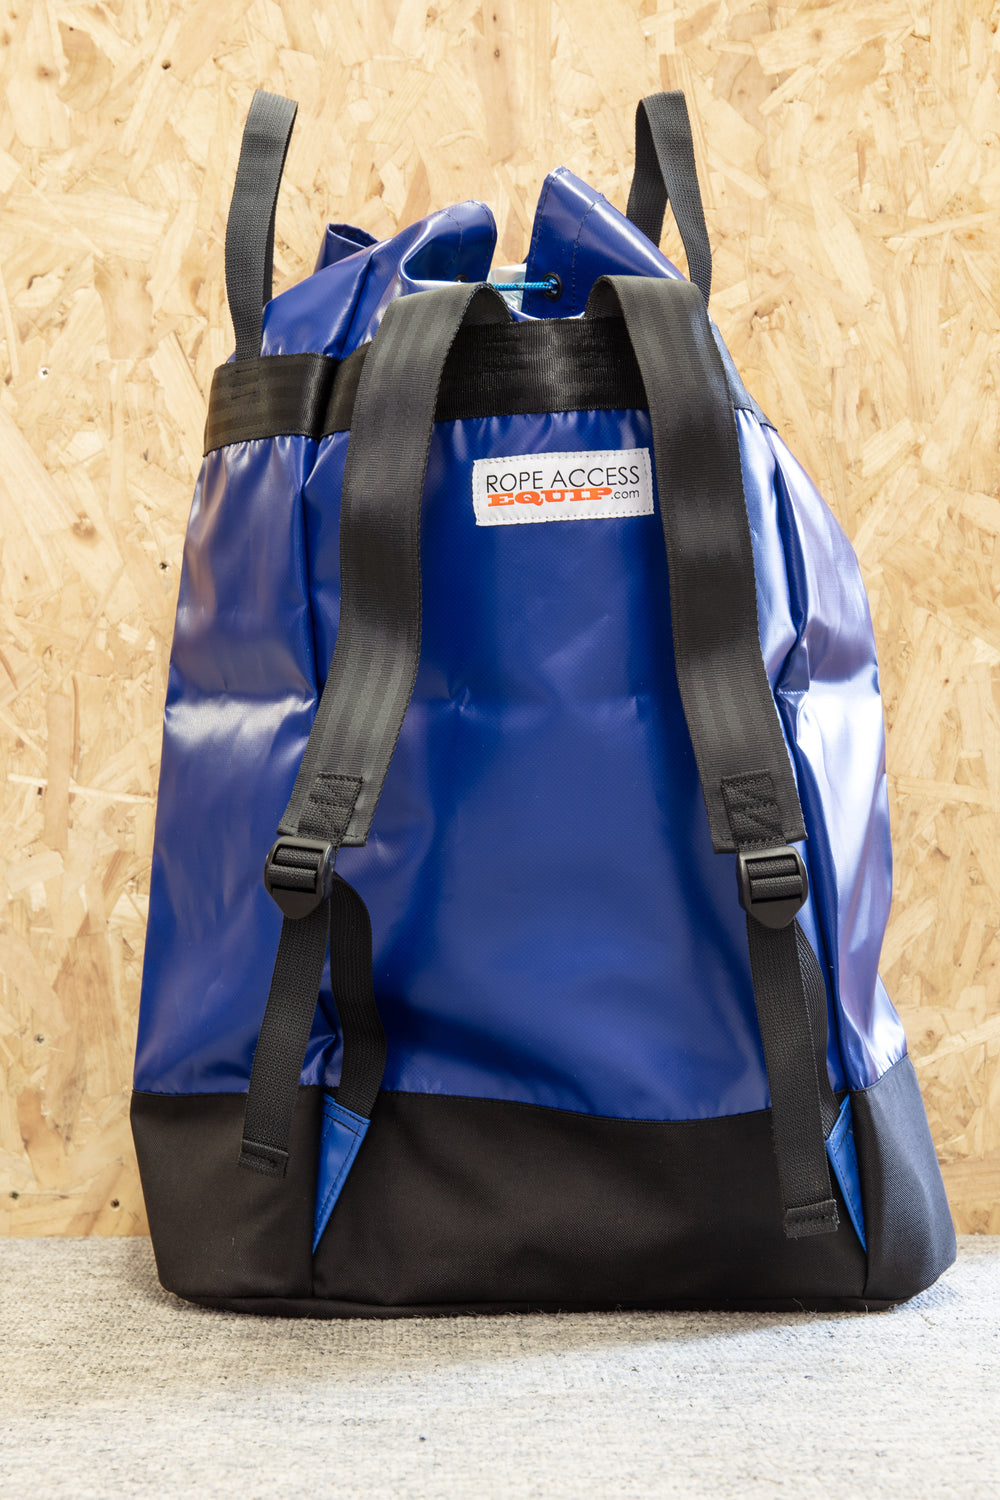 Rope Access Equip - Large Rope / Kit Bag (Blue, 250m, 60L)